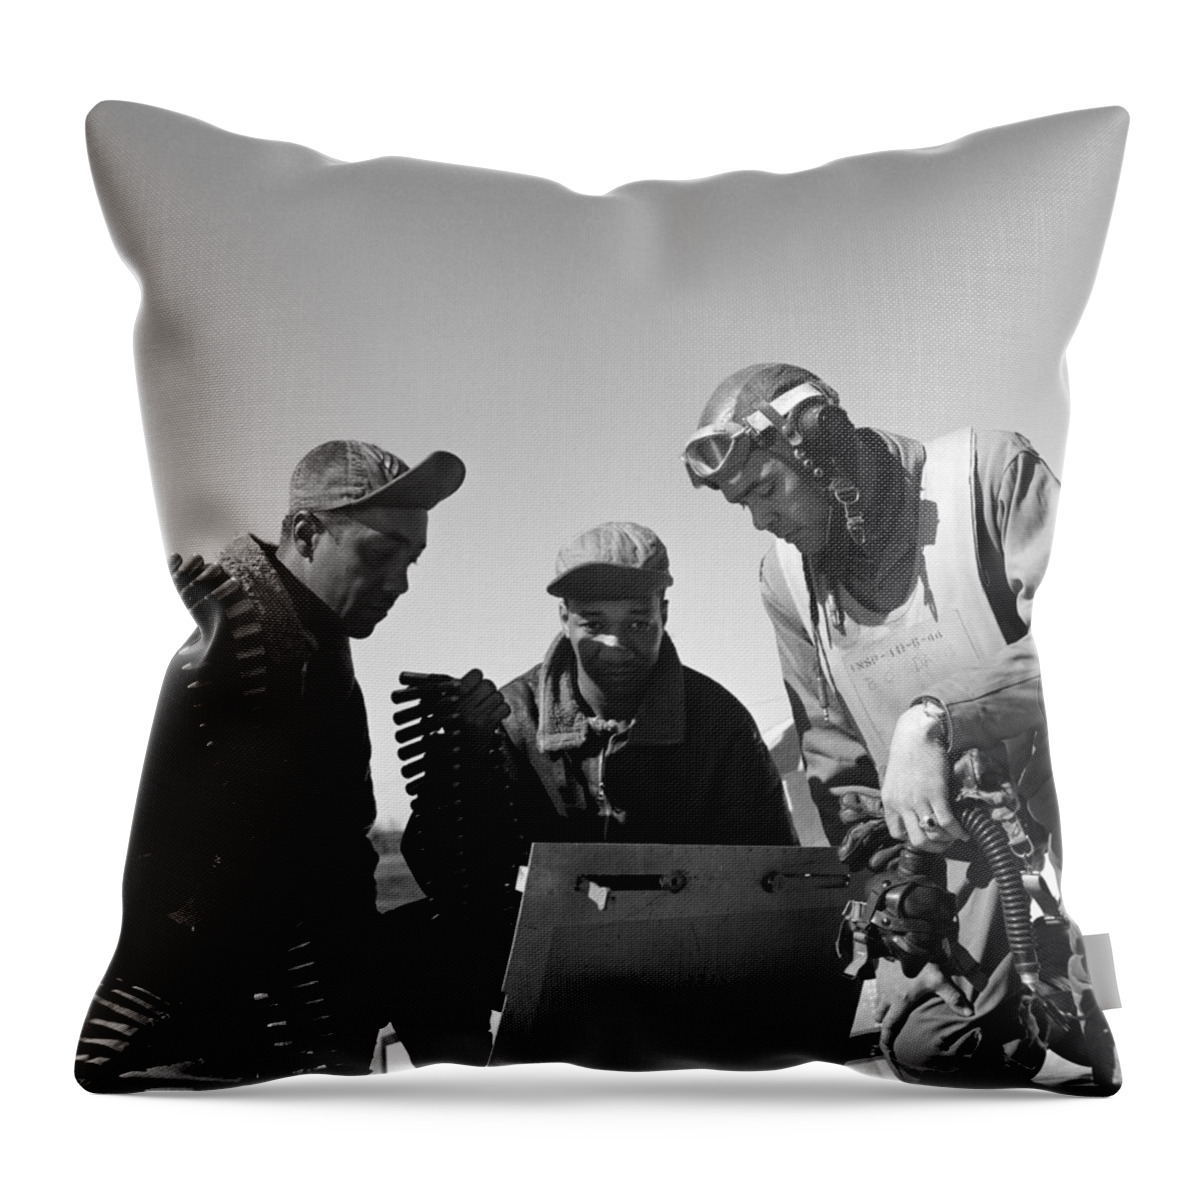 1945 Throw Pillow featuring the photograph Wwii: Tuskegee Airmen, 1945 #5 by Granger